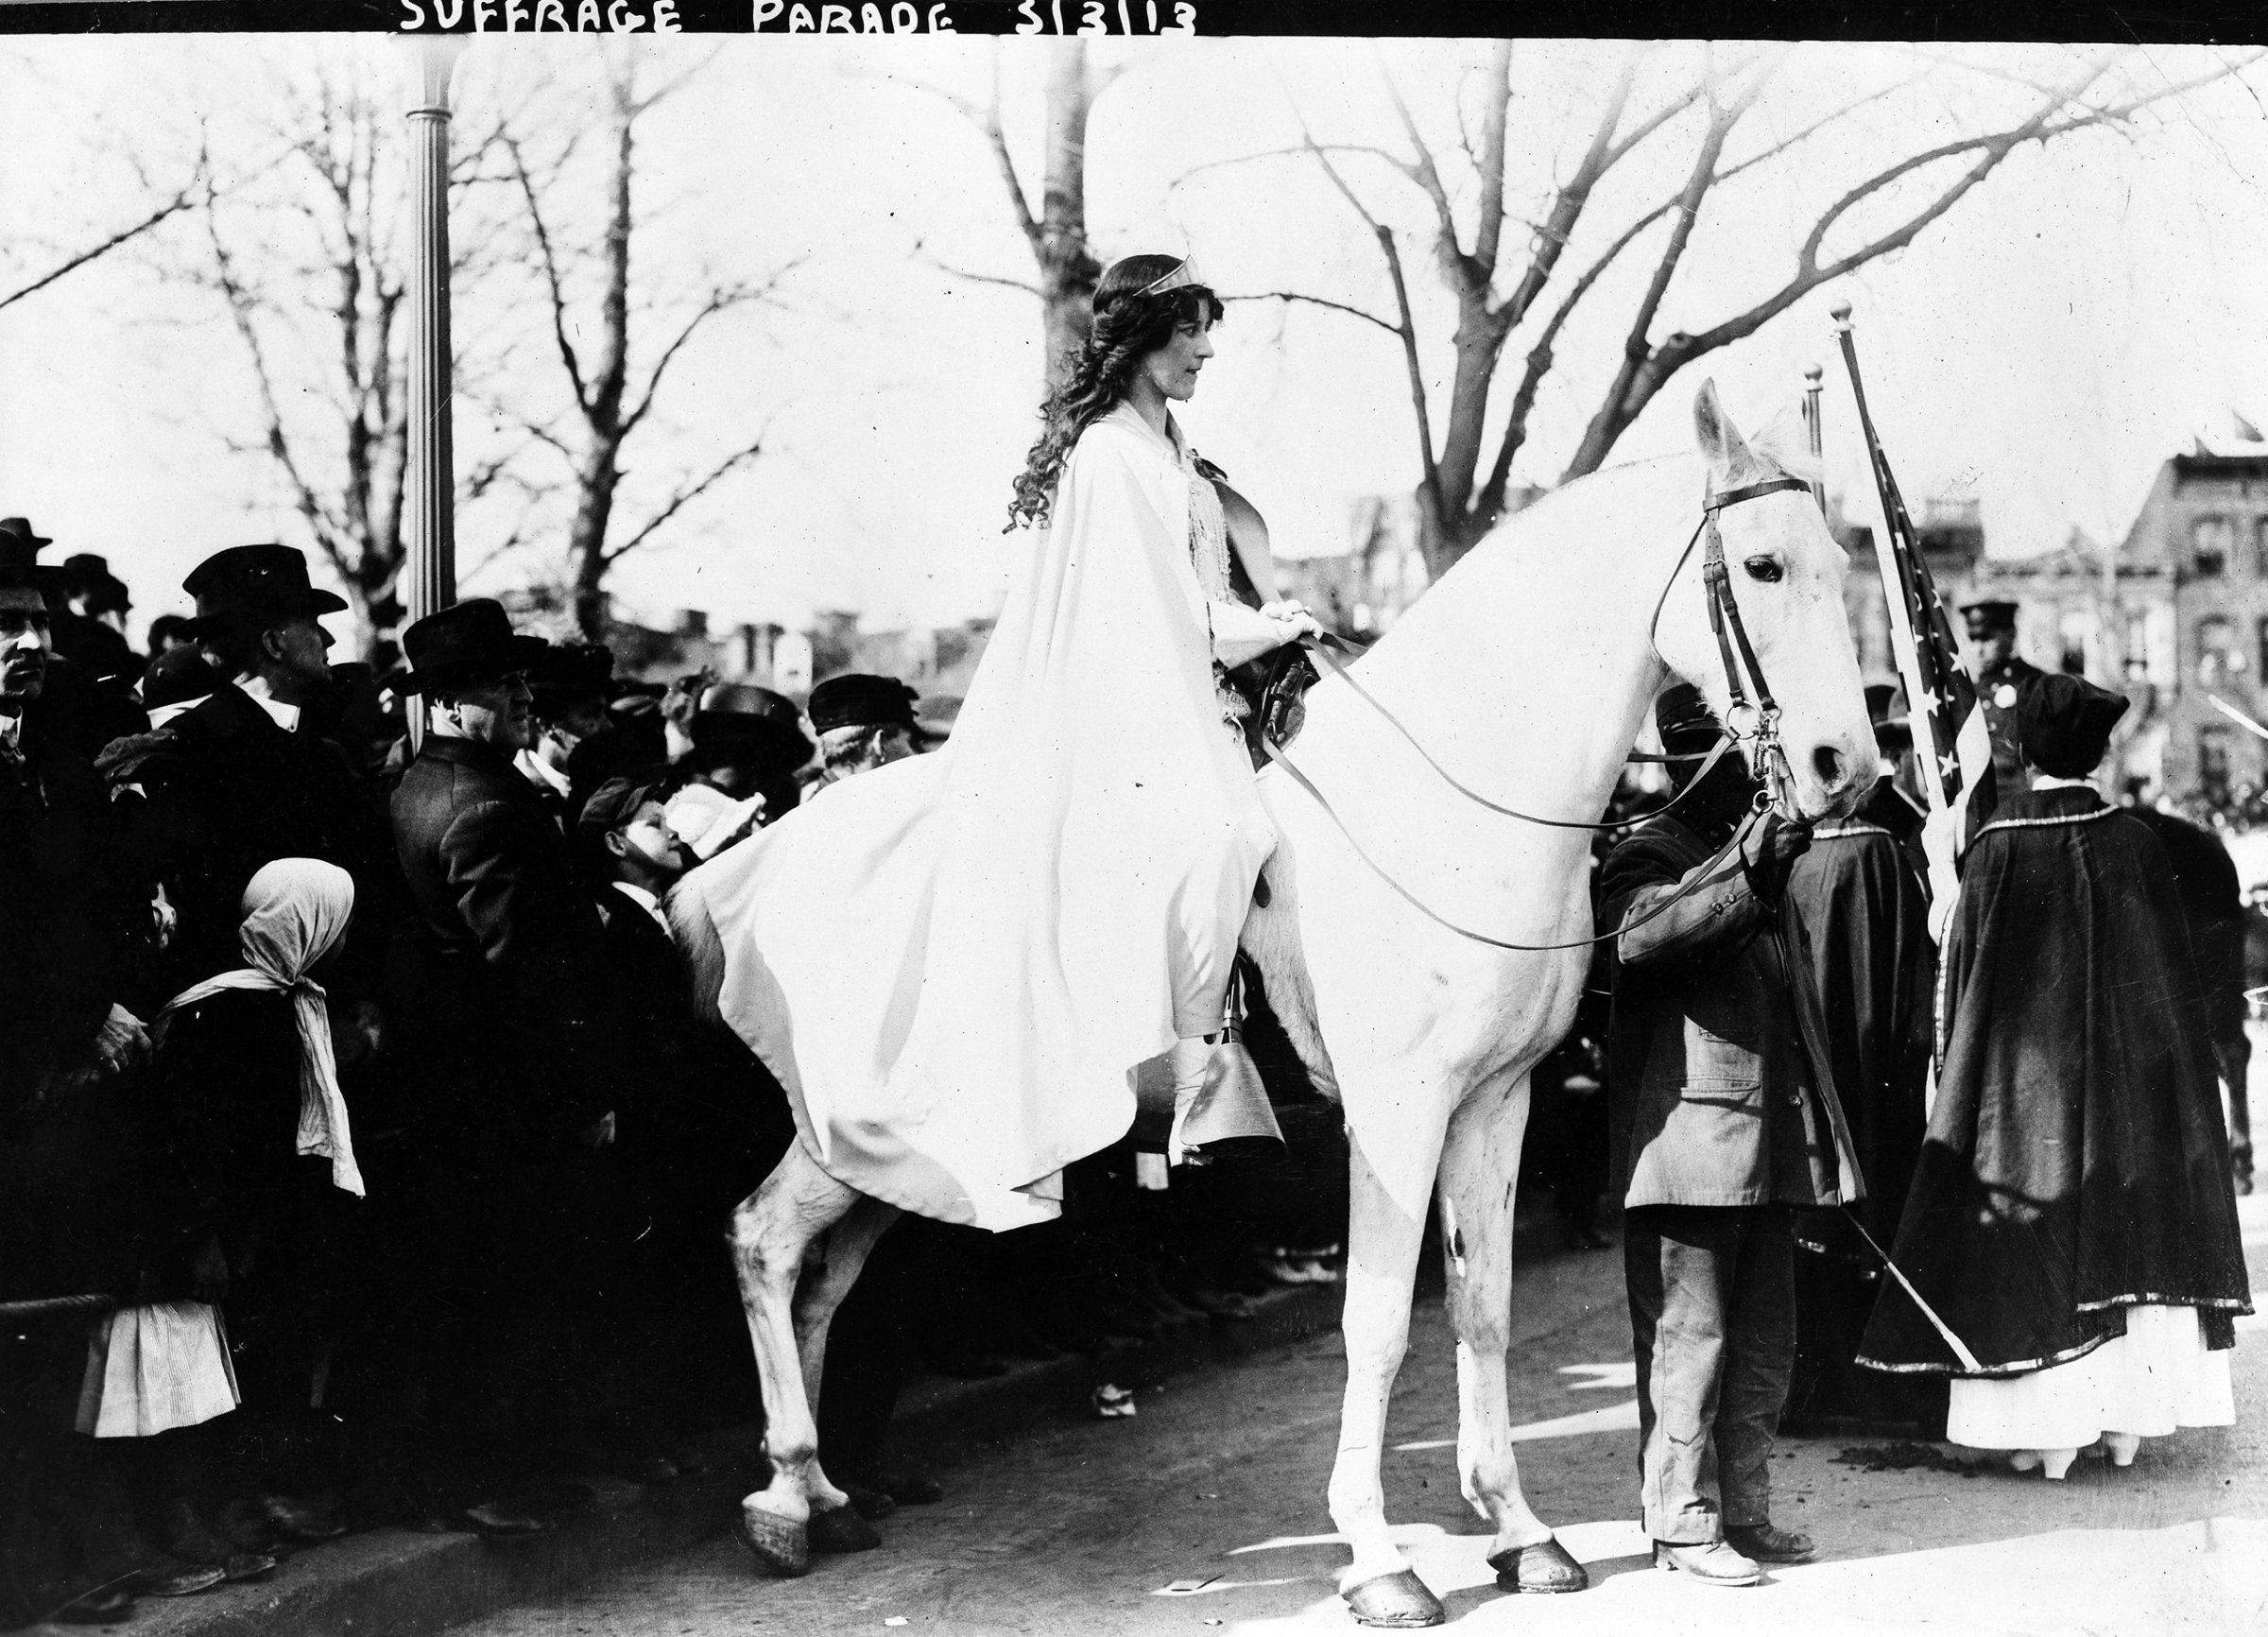 Inez Milholland Boissevain, wearing white cape, seated on white horse at the National American Woman Suffrage Association parade, March 3, 1913, Washington, D.C.